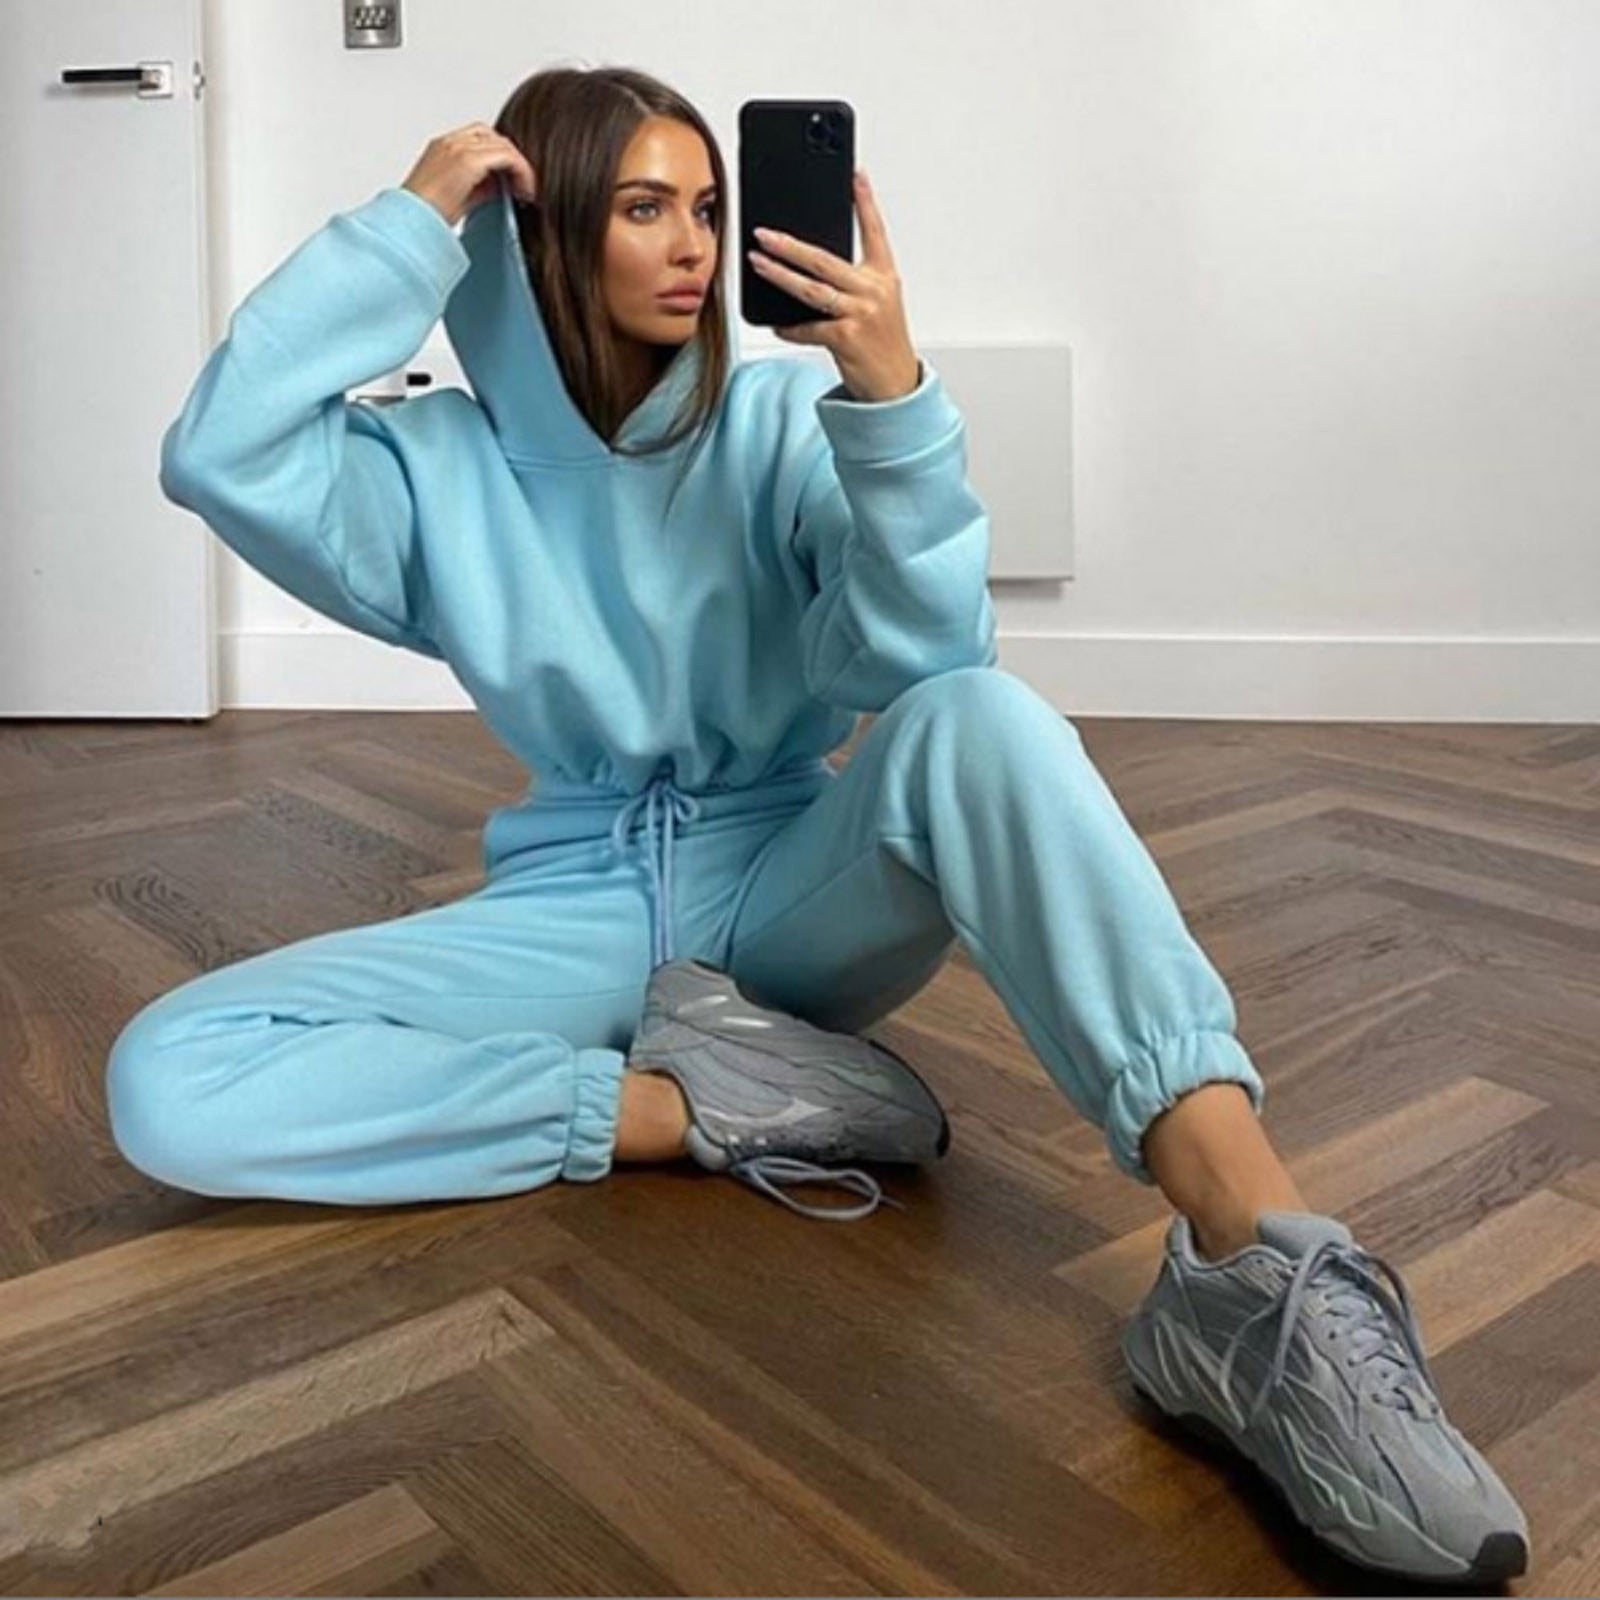 Christmas Gift Women 2 Pieces Set Tracksuit Autumn Solid Long Sleeve Pocket Sweatshirt Pullover Hoodies Top Pant Jogging Sweatpant Suit Outfits